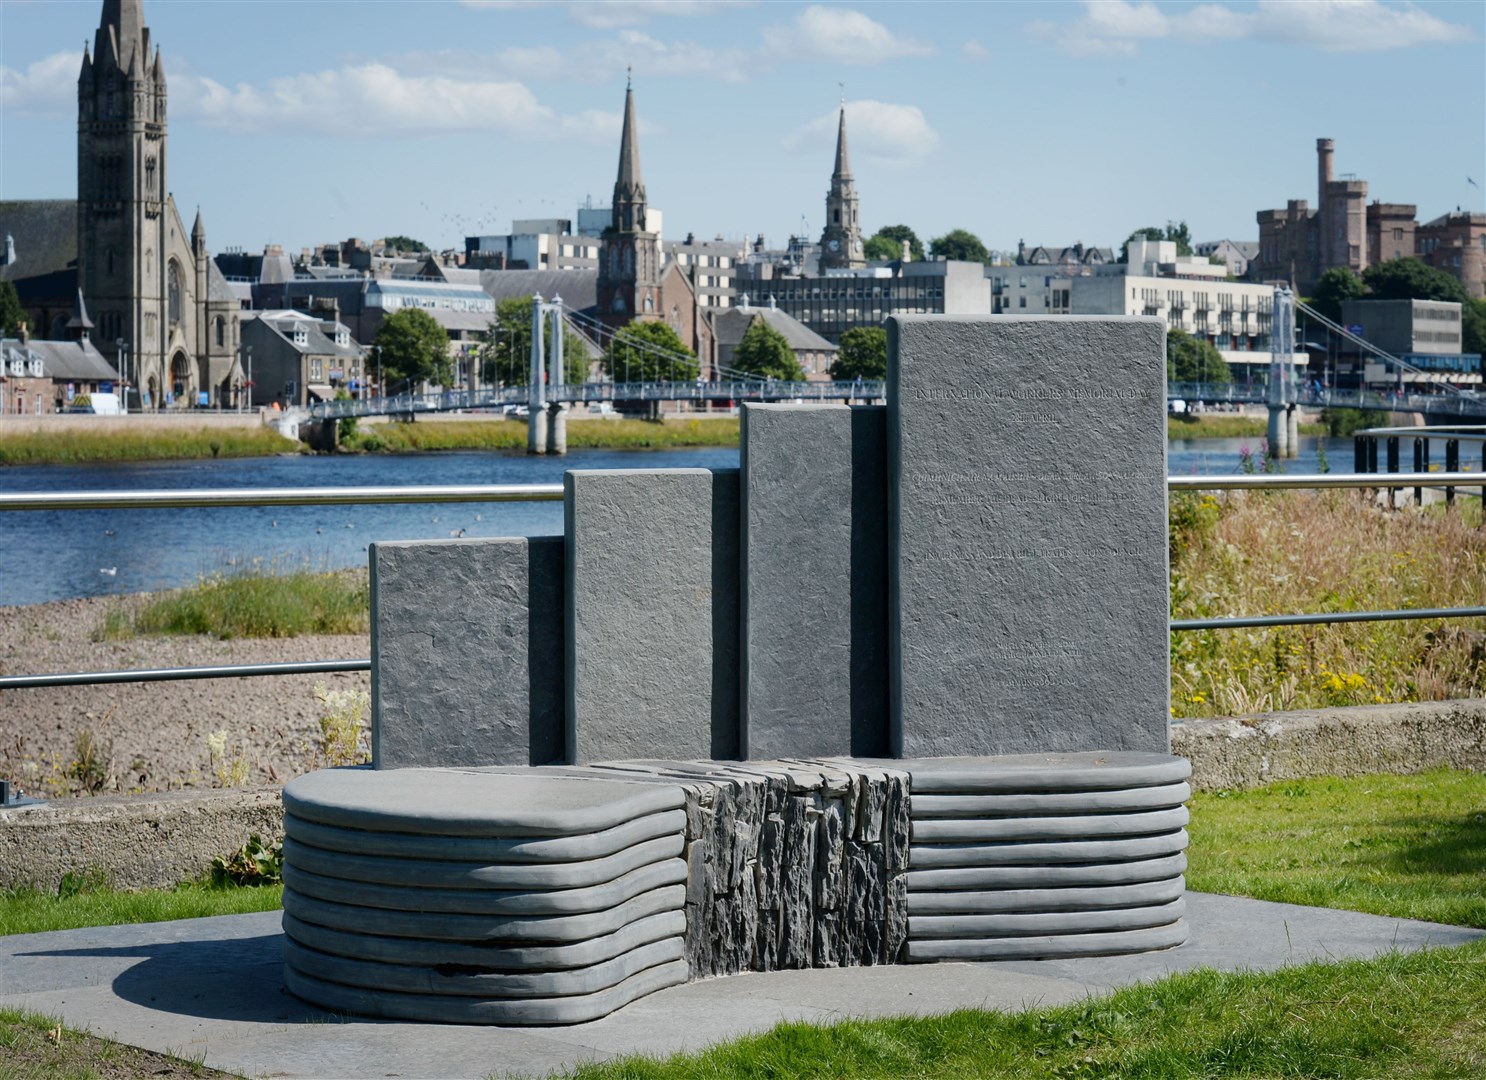 The workers' memorial by the River Ness in Inverness